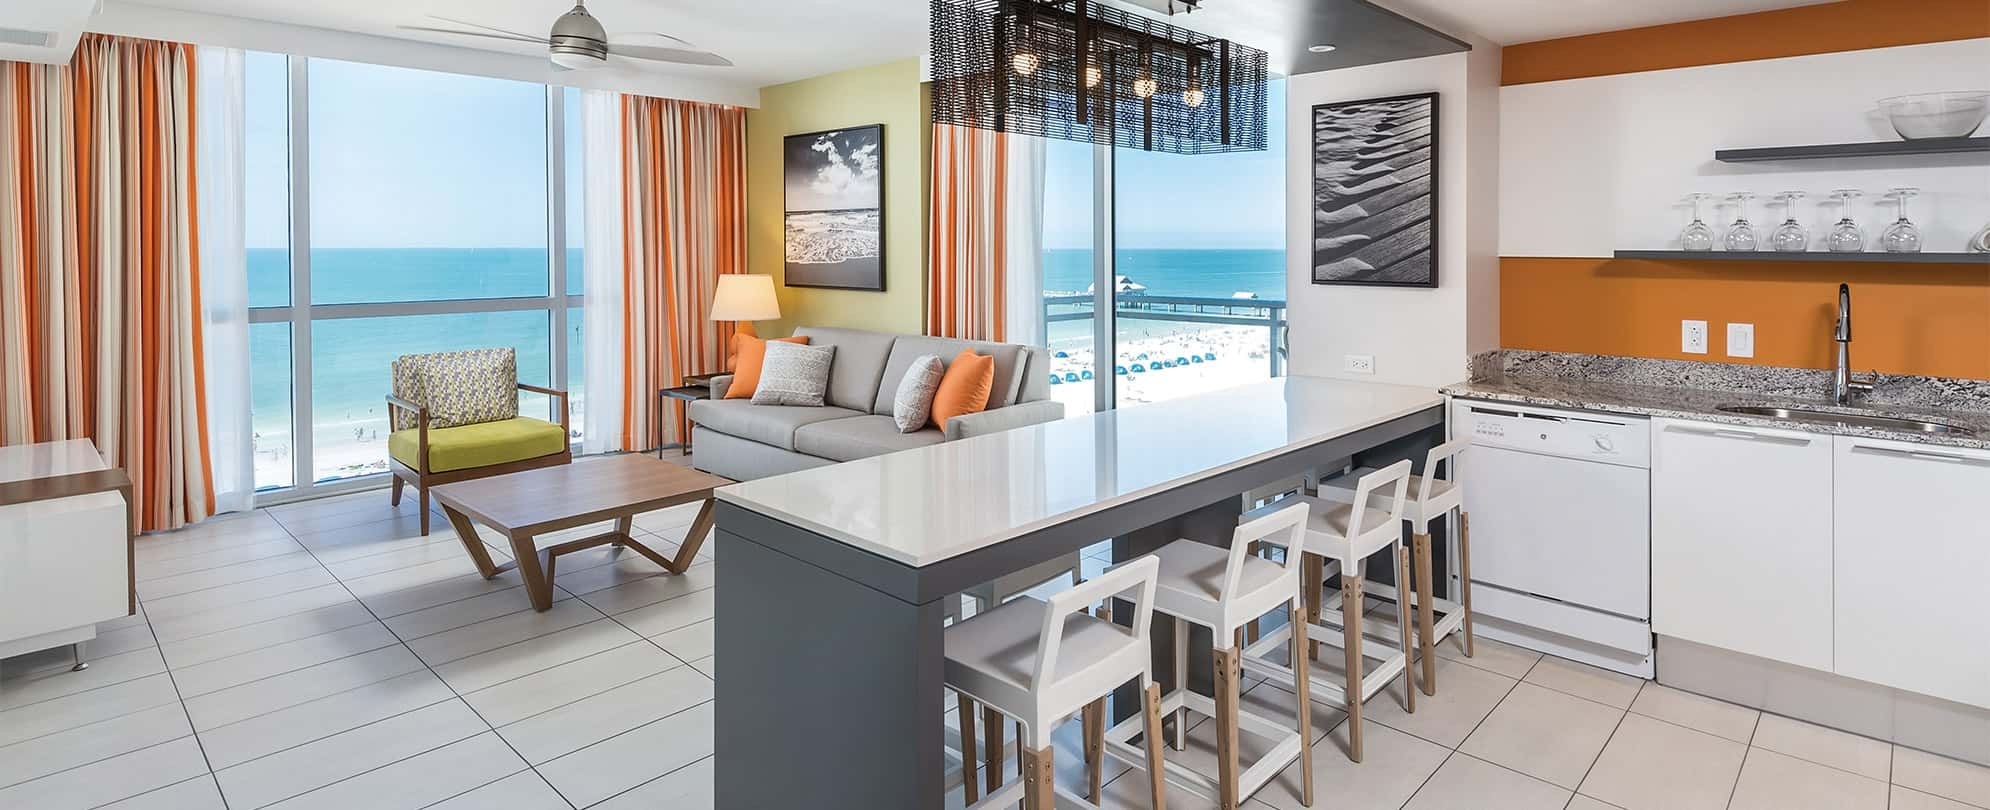 A modern living room and kitchen in a Margaritaville Vacation Club suite with a view of the ocean.